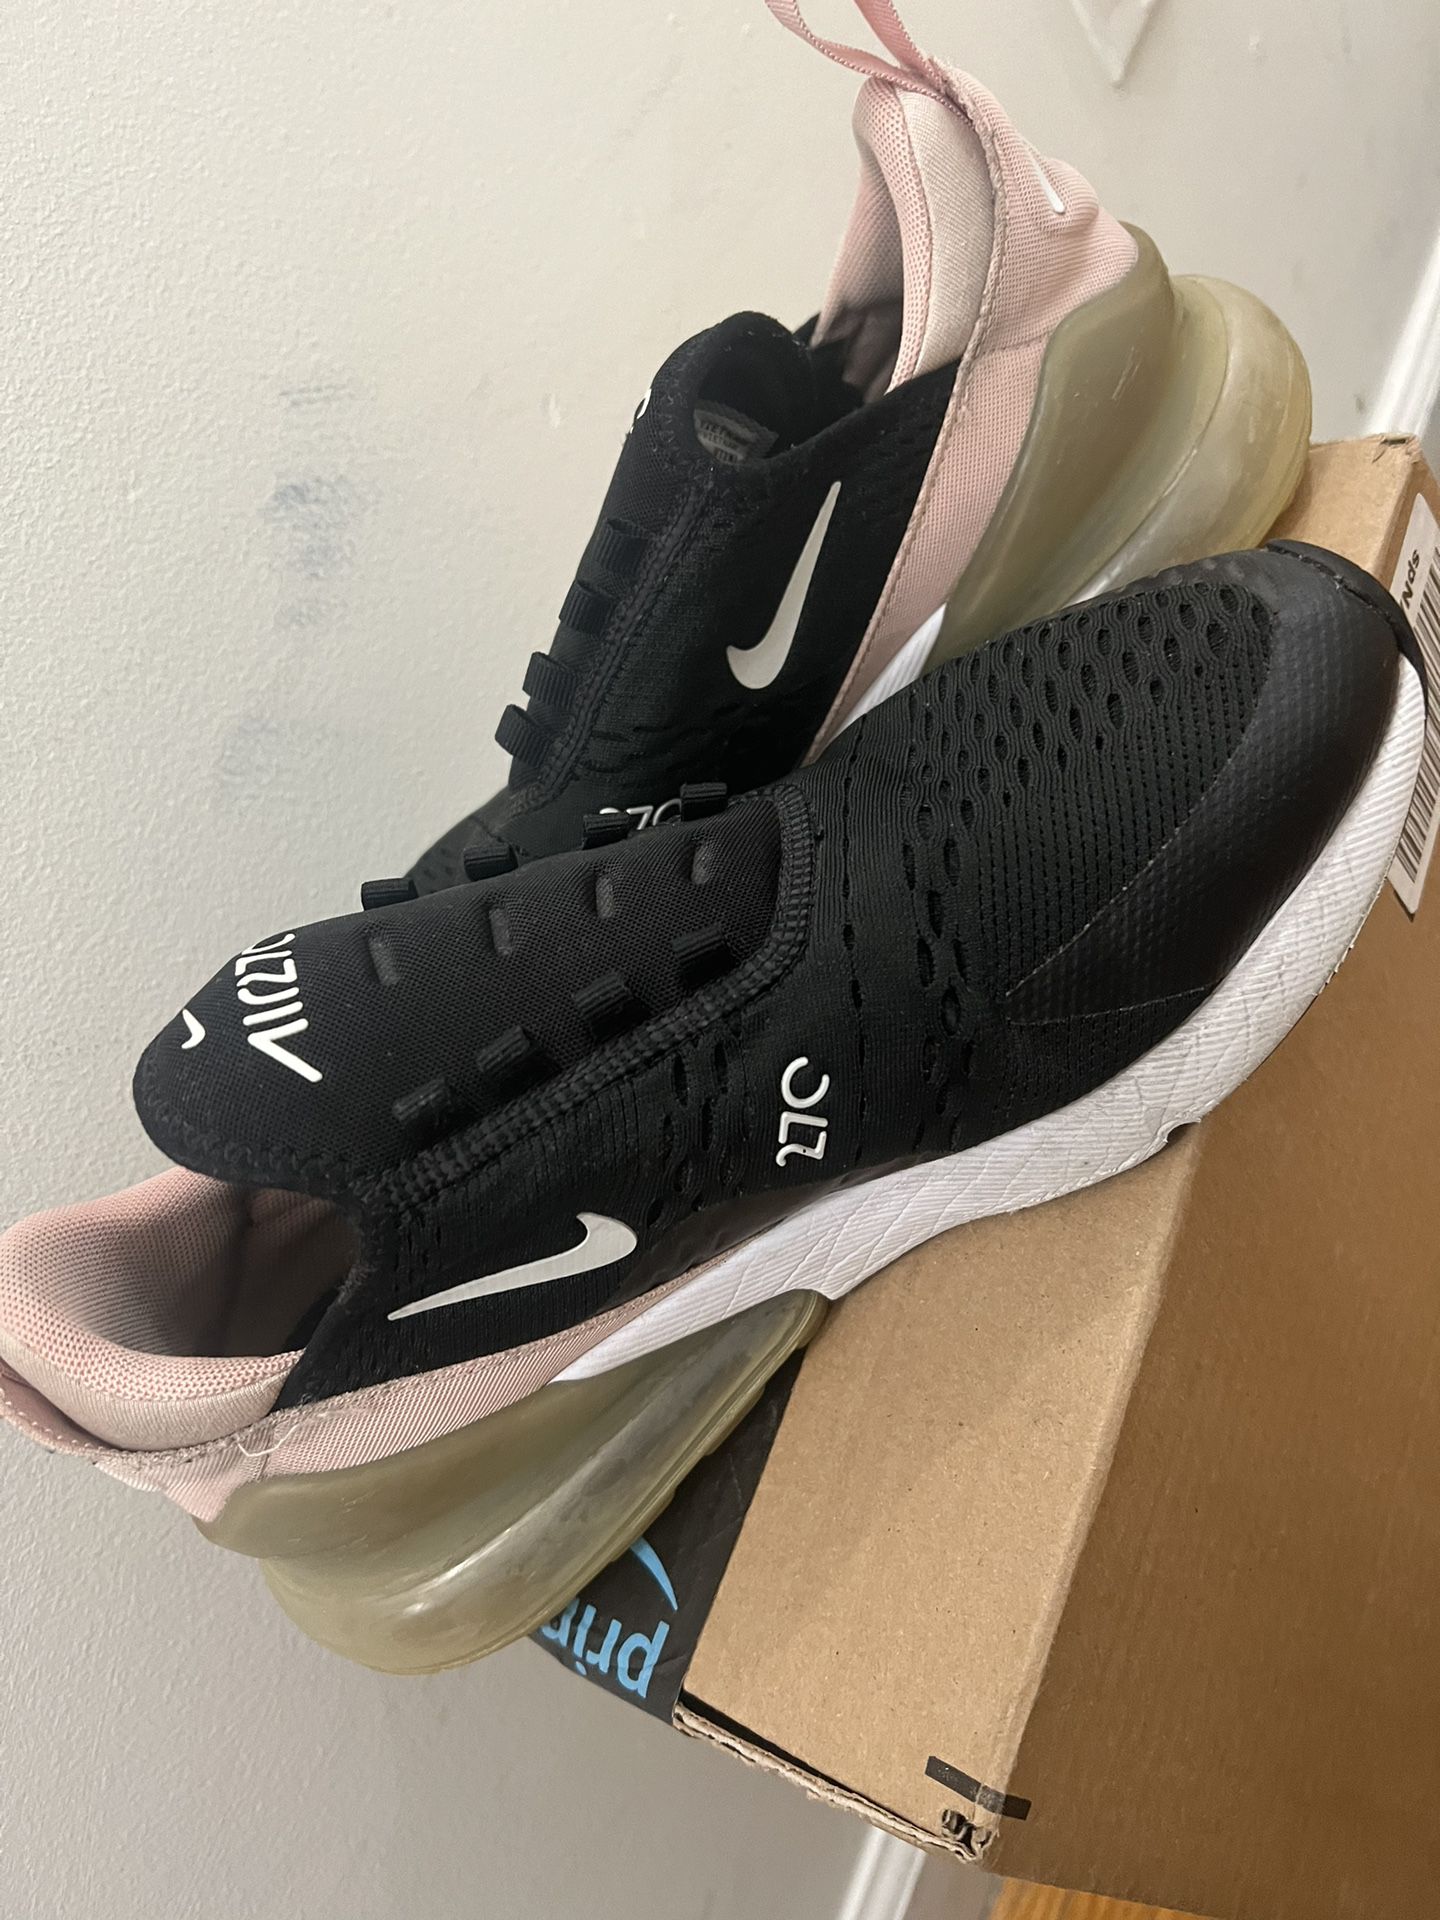 AIR 27C WOMENS size 8 Pink for Sale in Brooklyn, NY